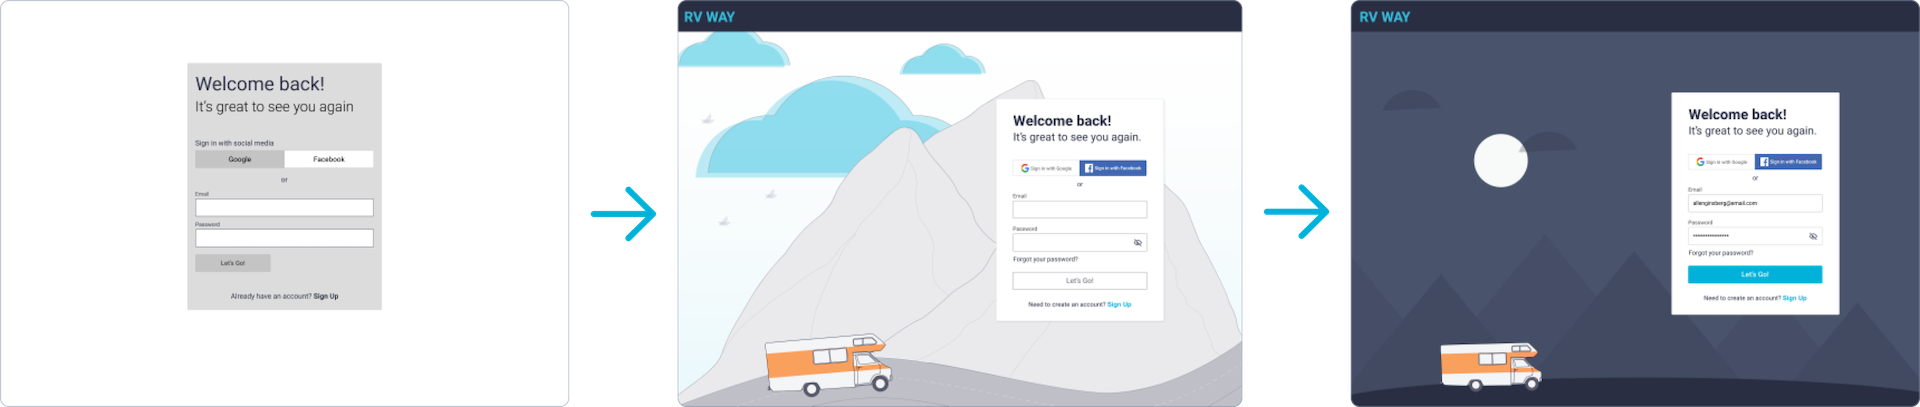 Iterations of the sign-up page